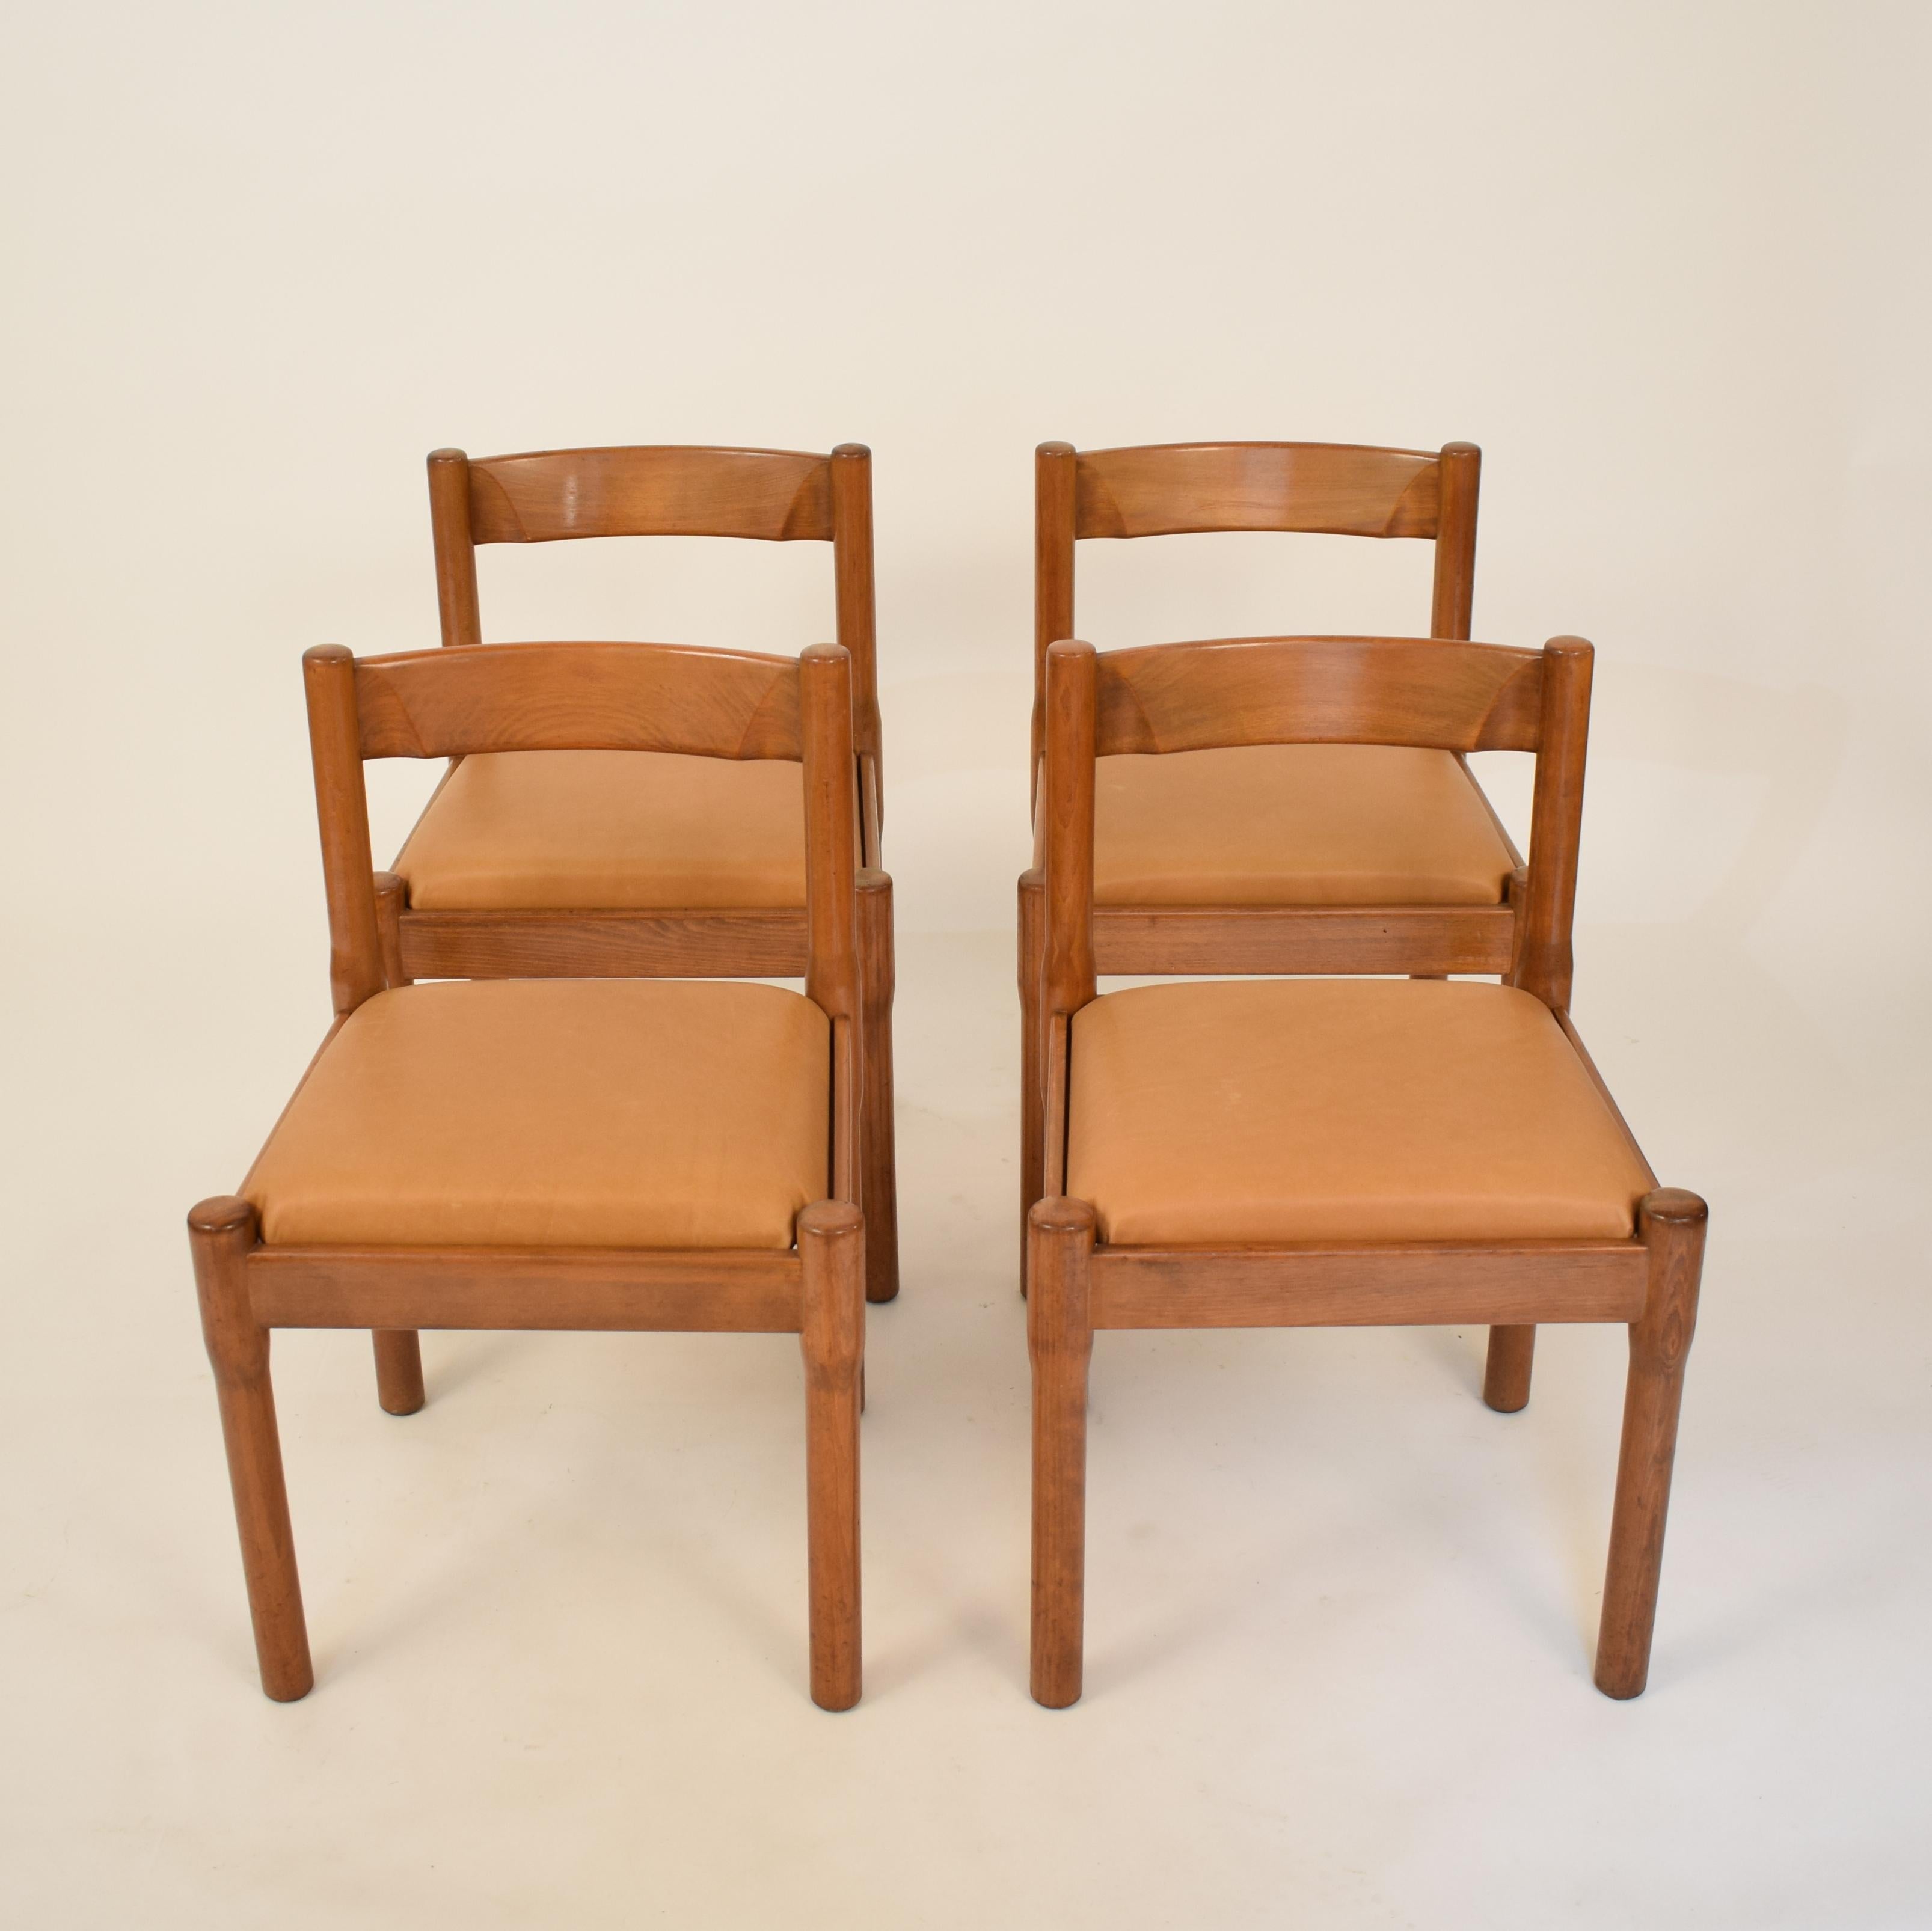 Italian Set of Four Mid-Century Dining Chairs Carimate by Vico Magistretti for Cassina